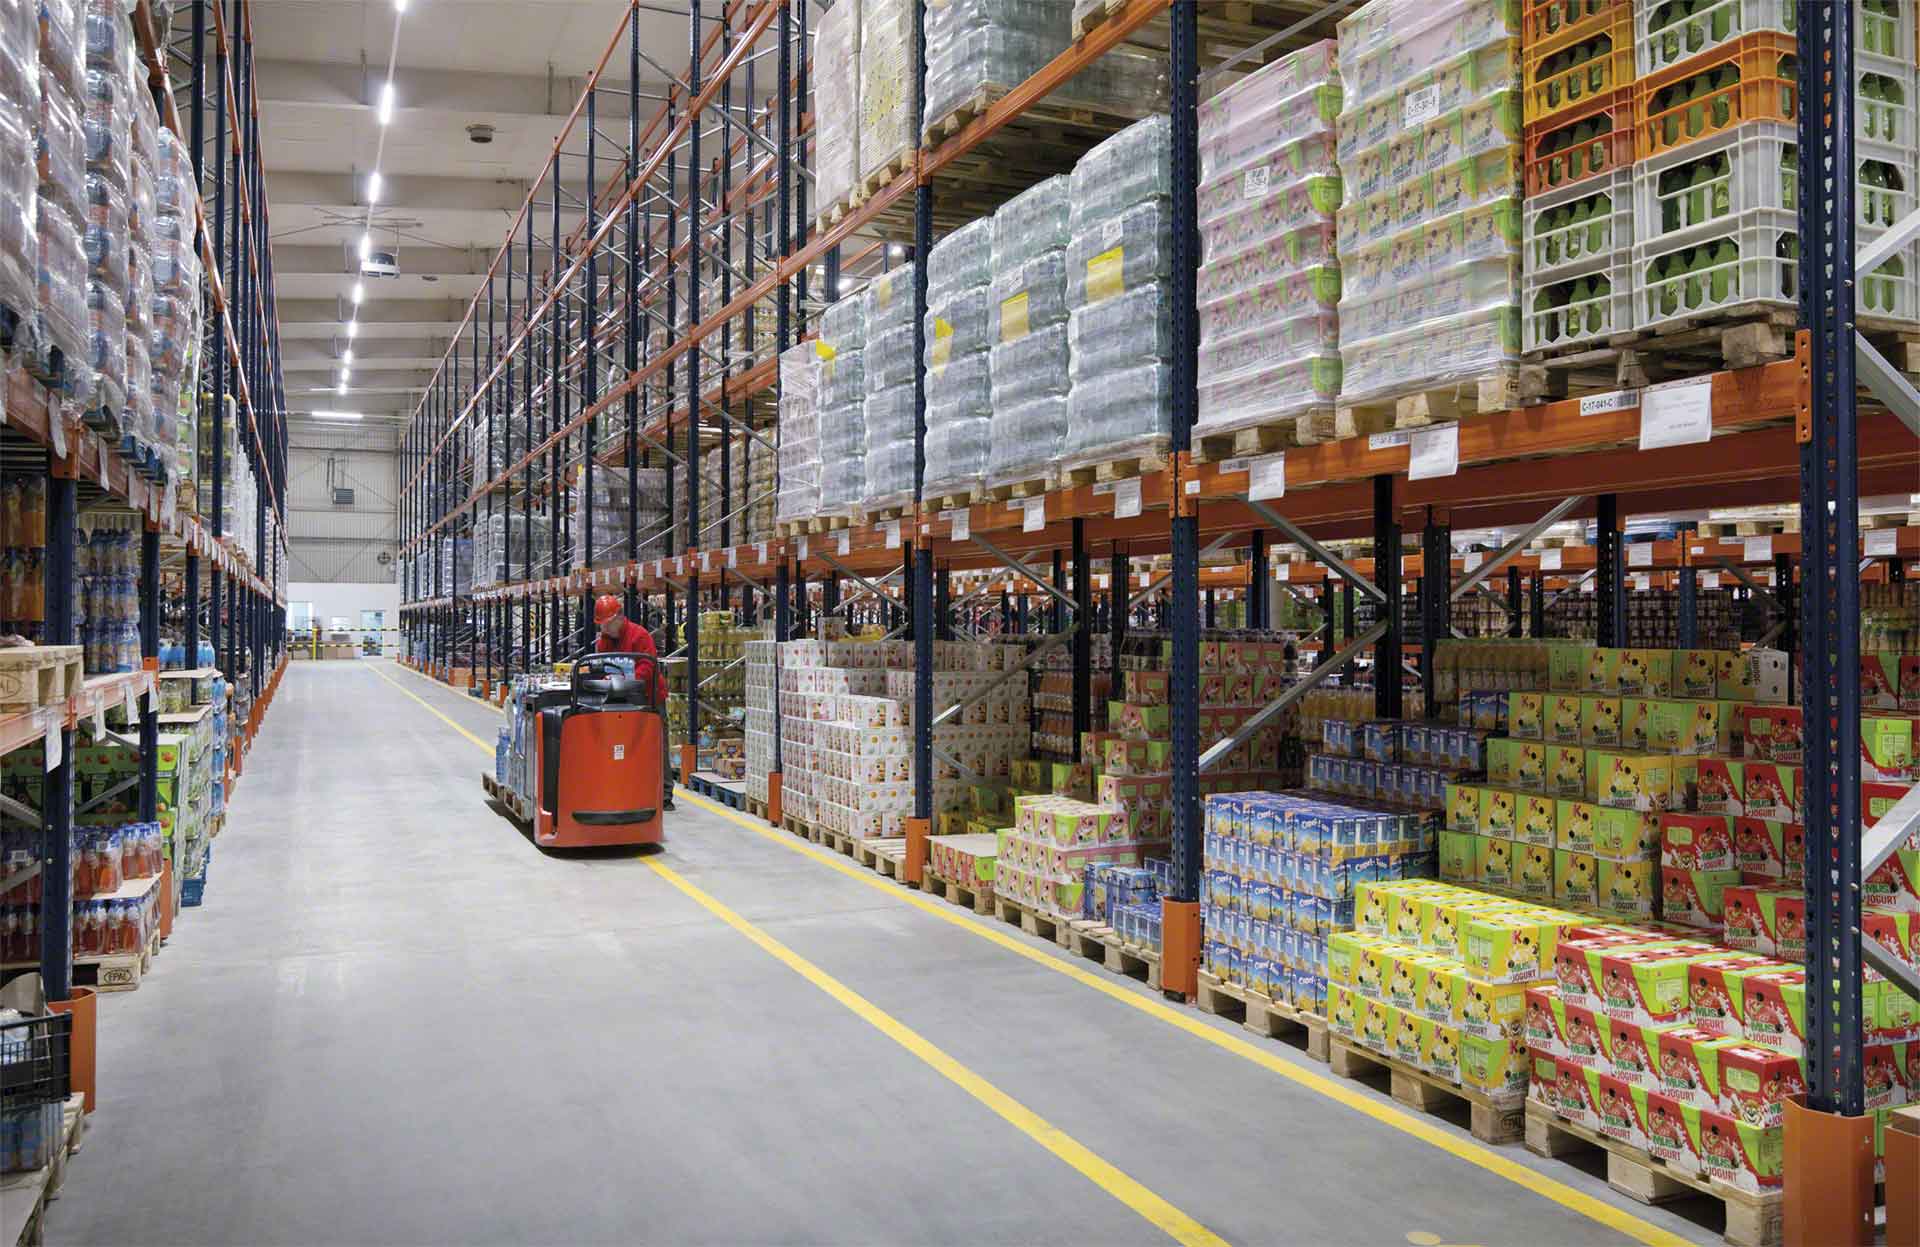 Cycle counting: how to implement it in the warehouse